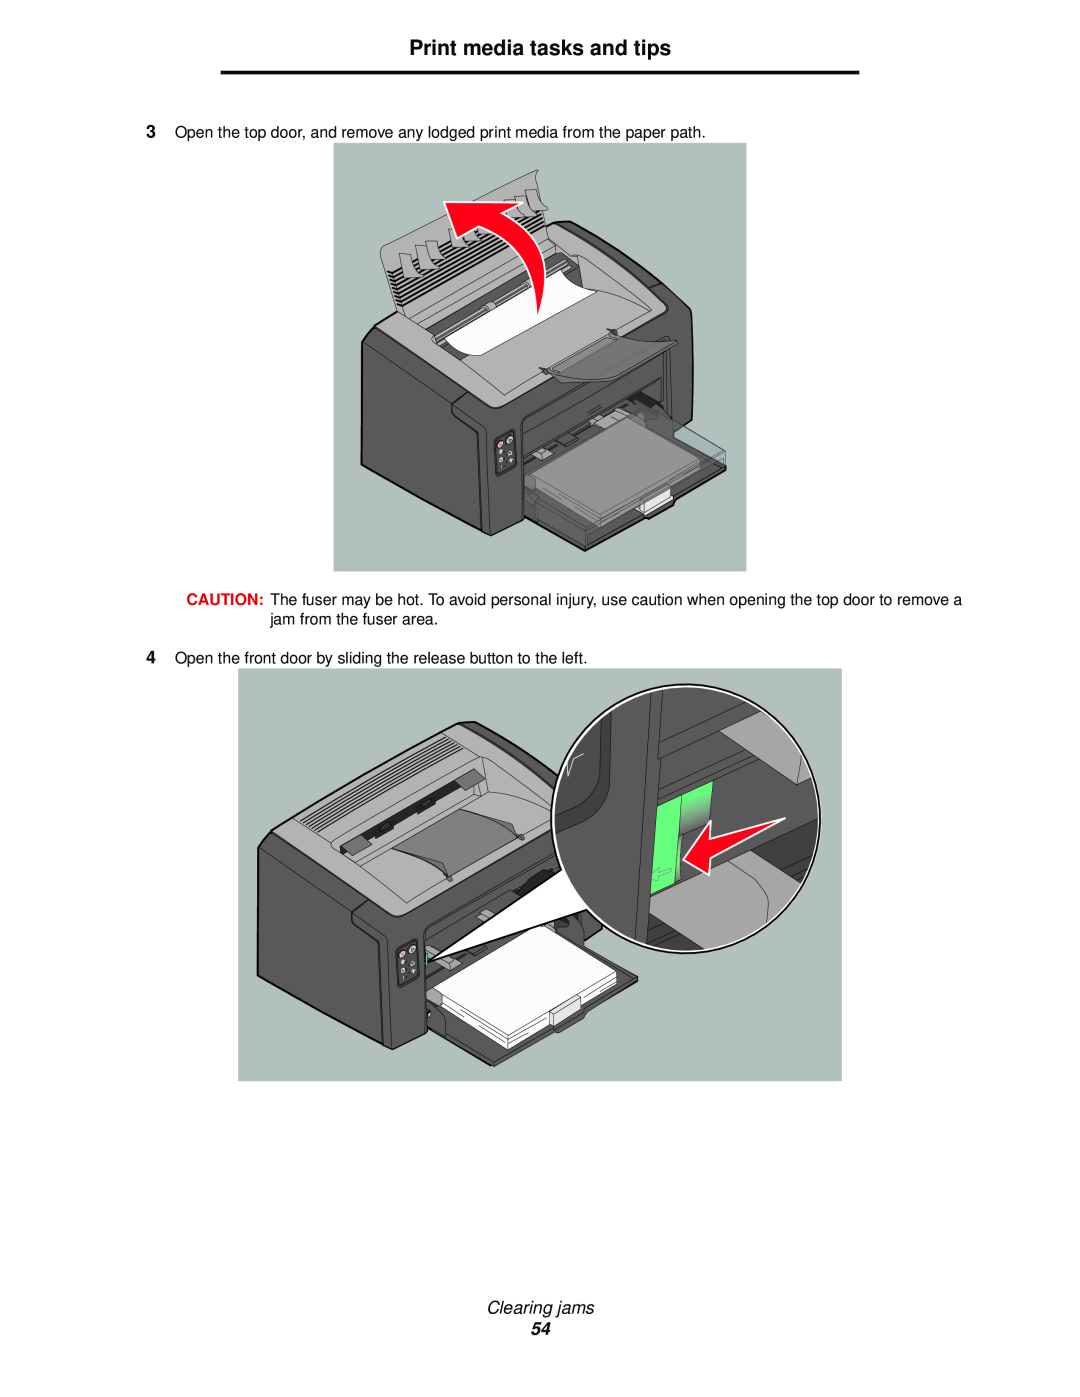 Lexmark 120 manual Print media tasks and tips, Clearing jams, Open the front door by sliding the release button to the left 